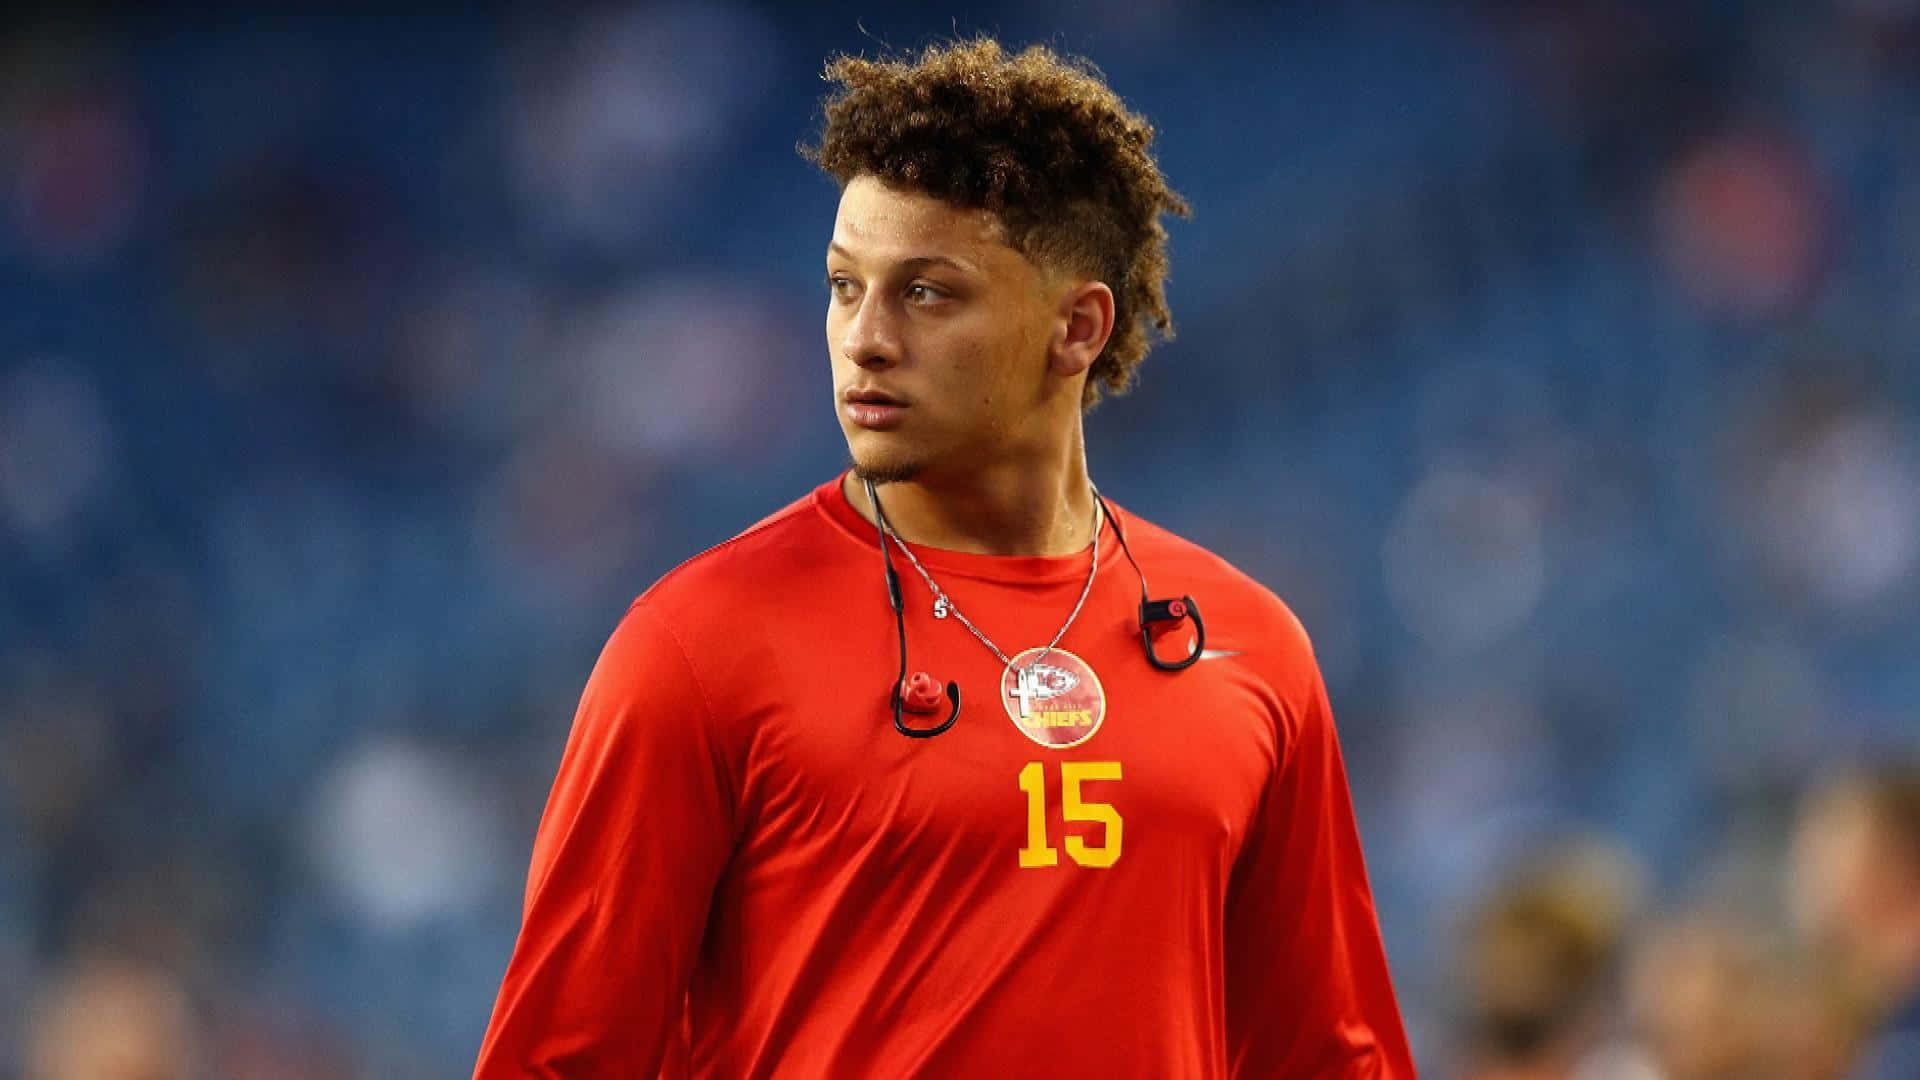 Cool And Collected, Patrick Mahomes Background